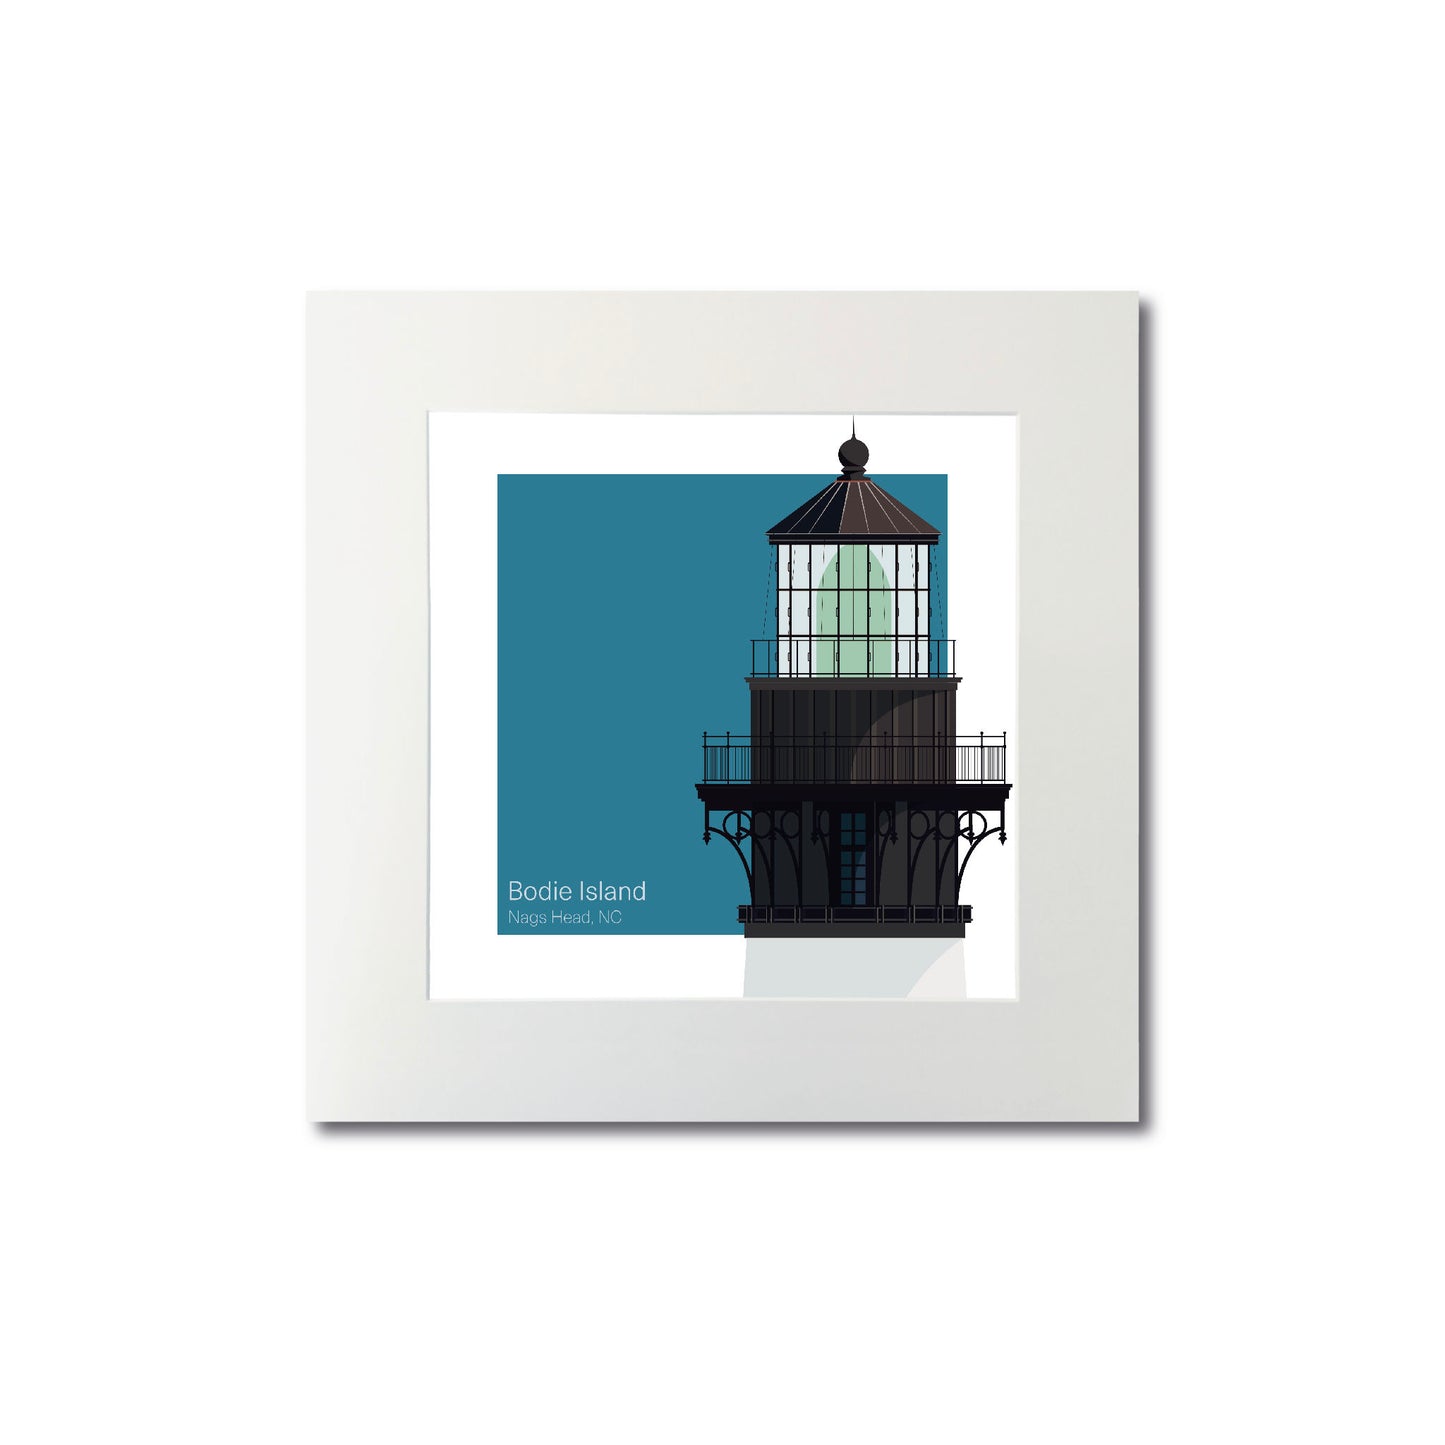 Illustration of the Bodie Island lighthouse, NC, USA. On a white background with aqua blue square as a backdrop., mounted and measuring 8"x8" (20x20cm).